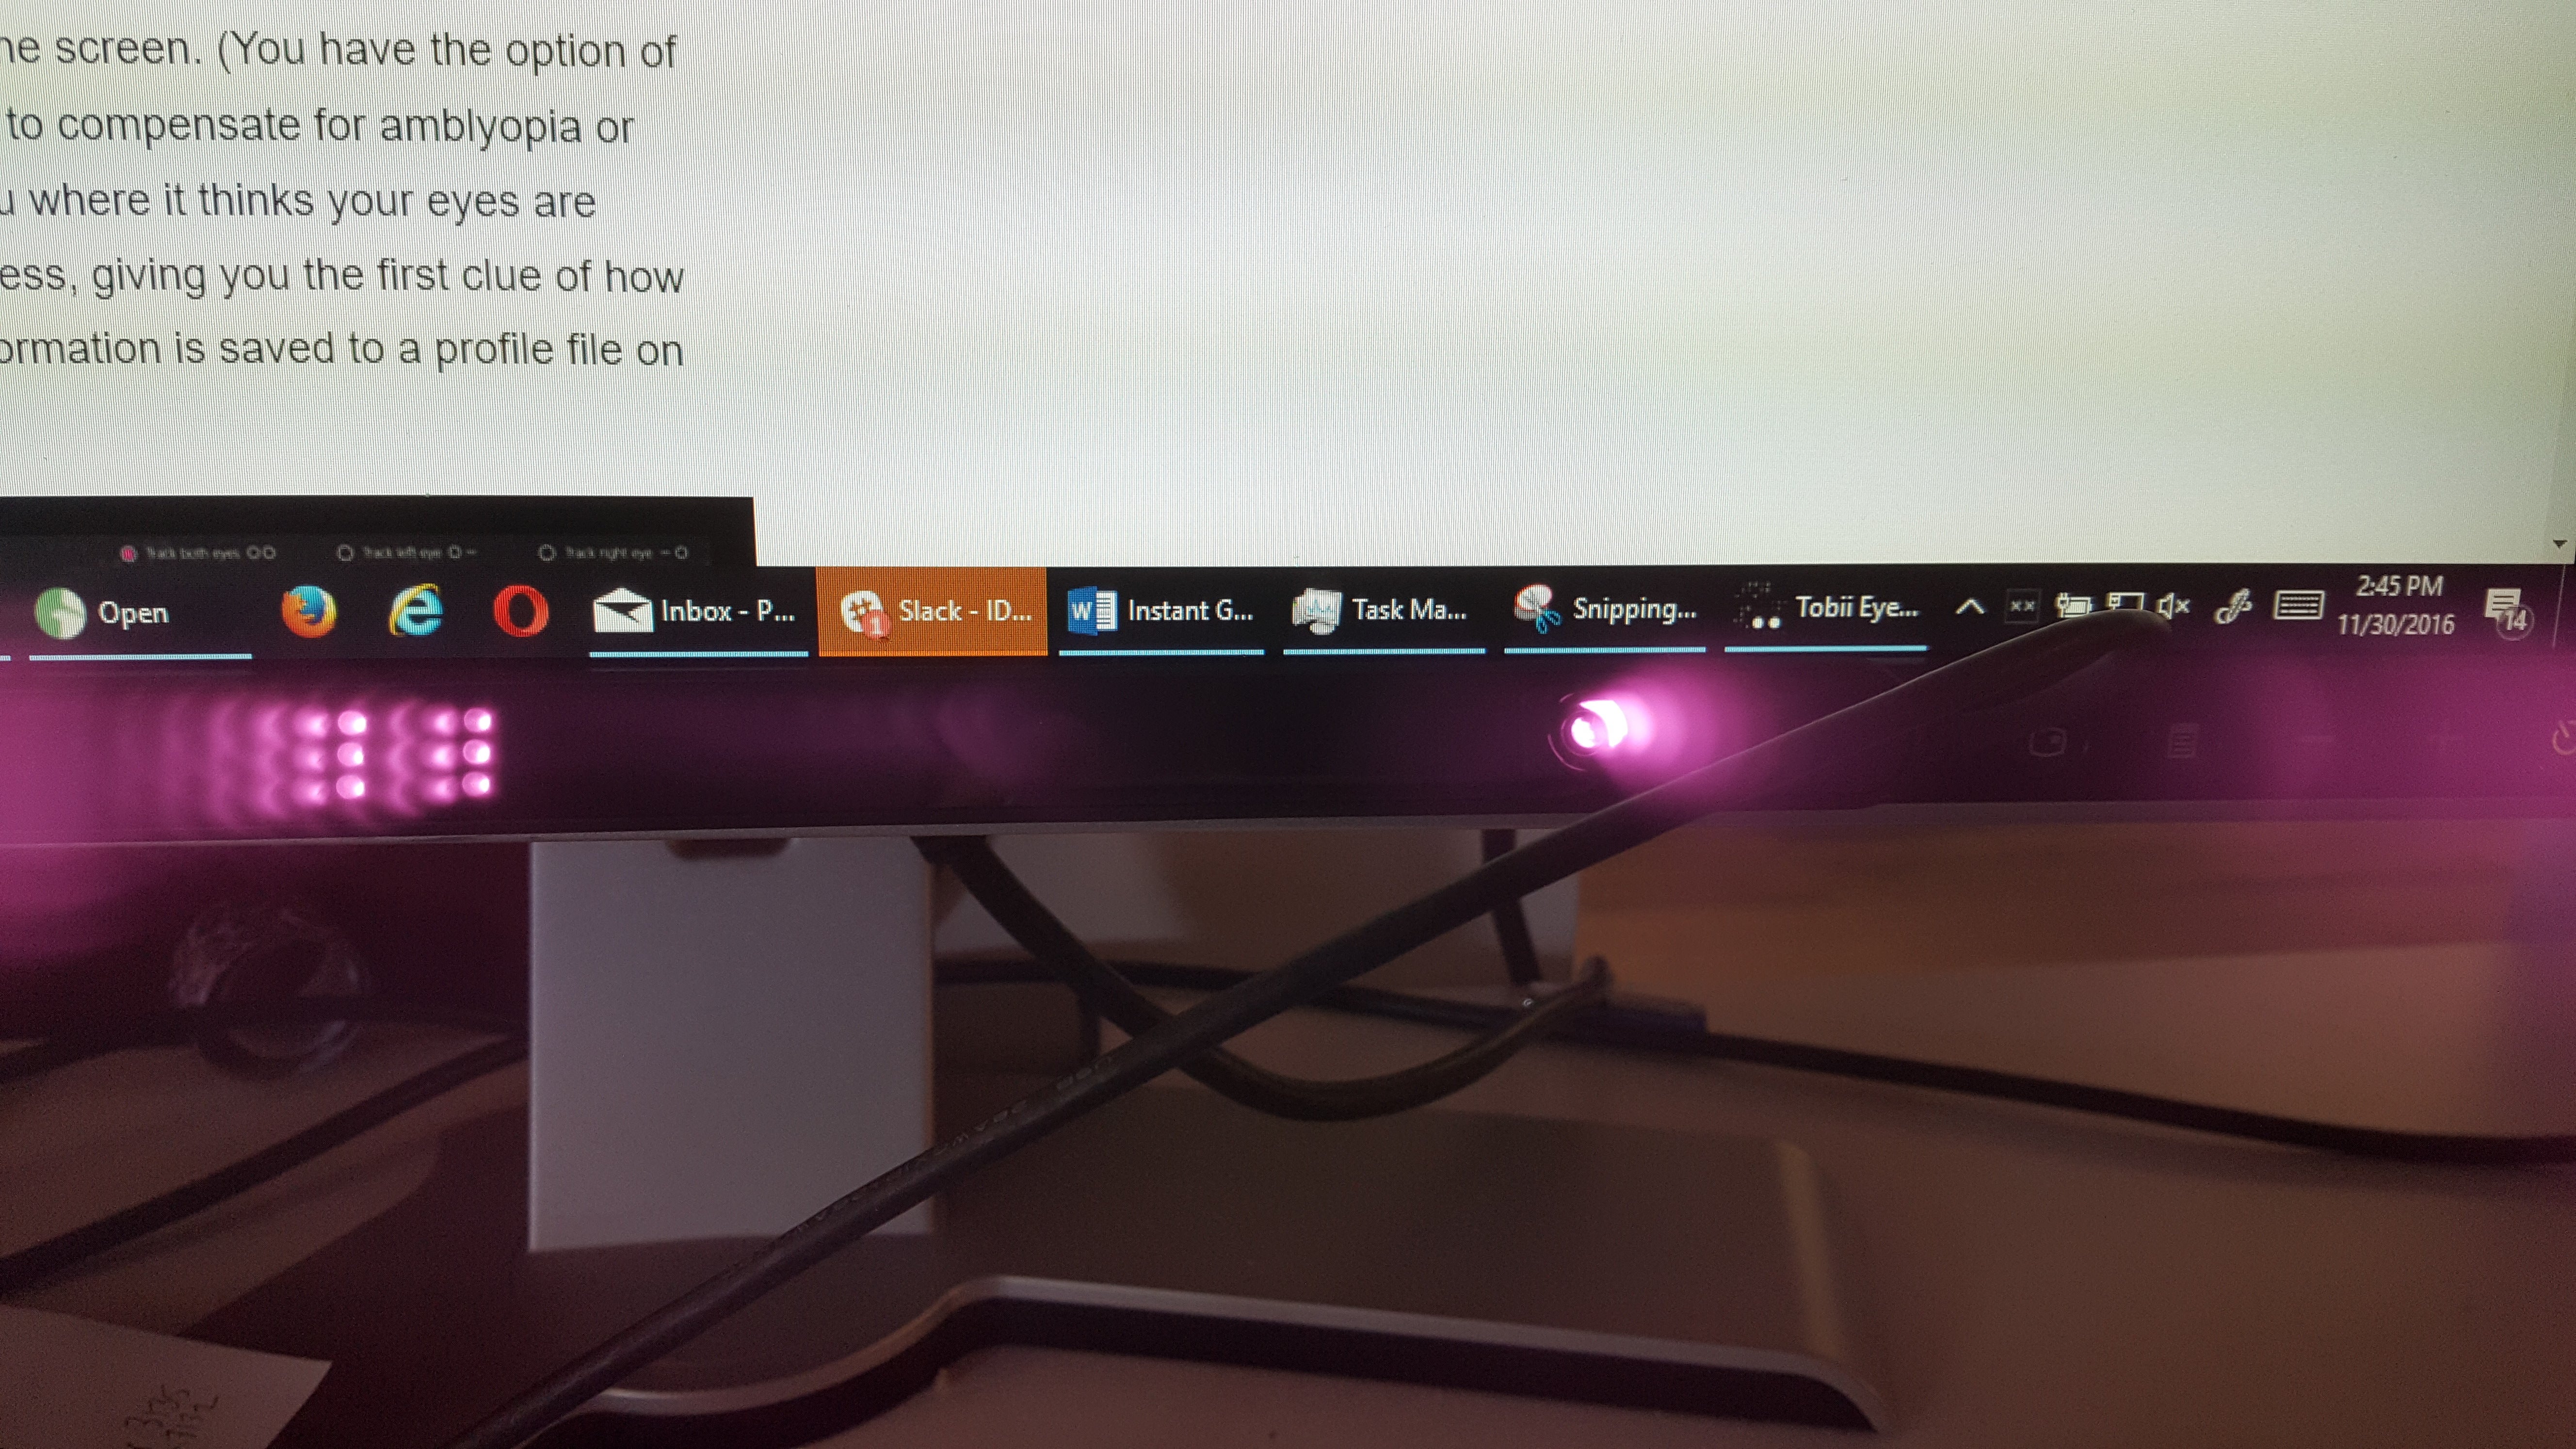 Tobii Eye Tracker 4c Hands On Mousing With Your Eyes Has Surprising Potential For Gaming Pcworld